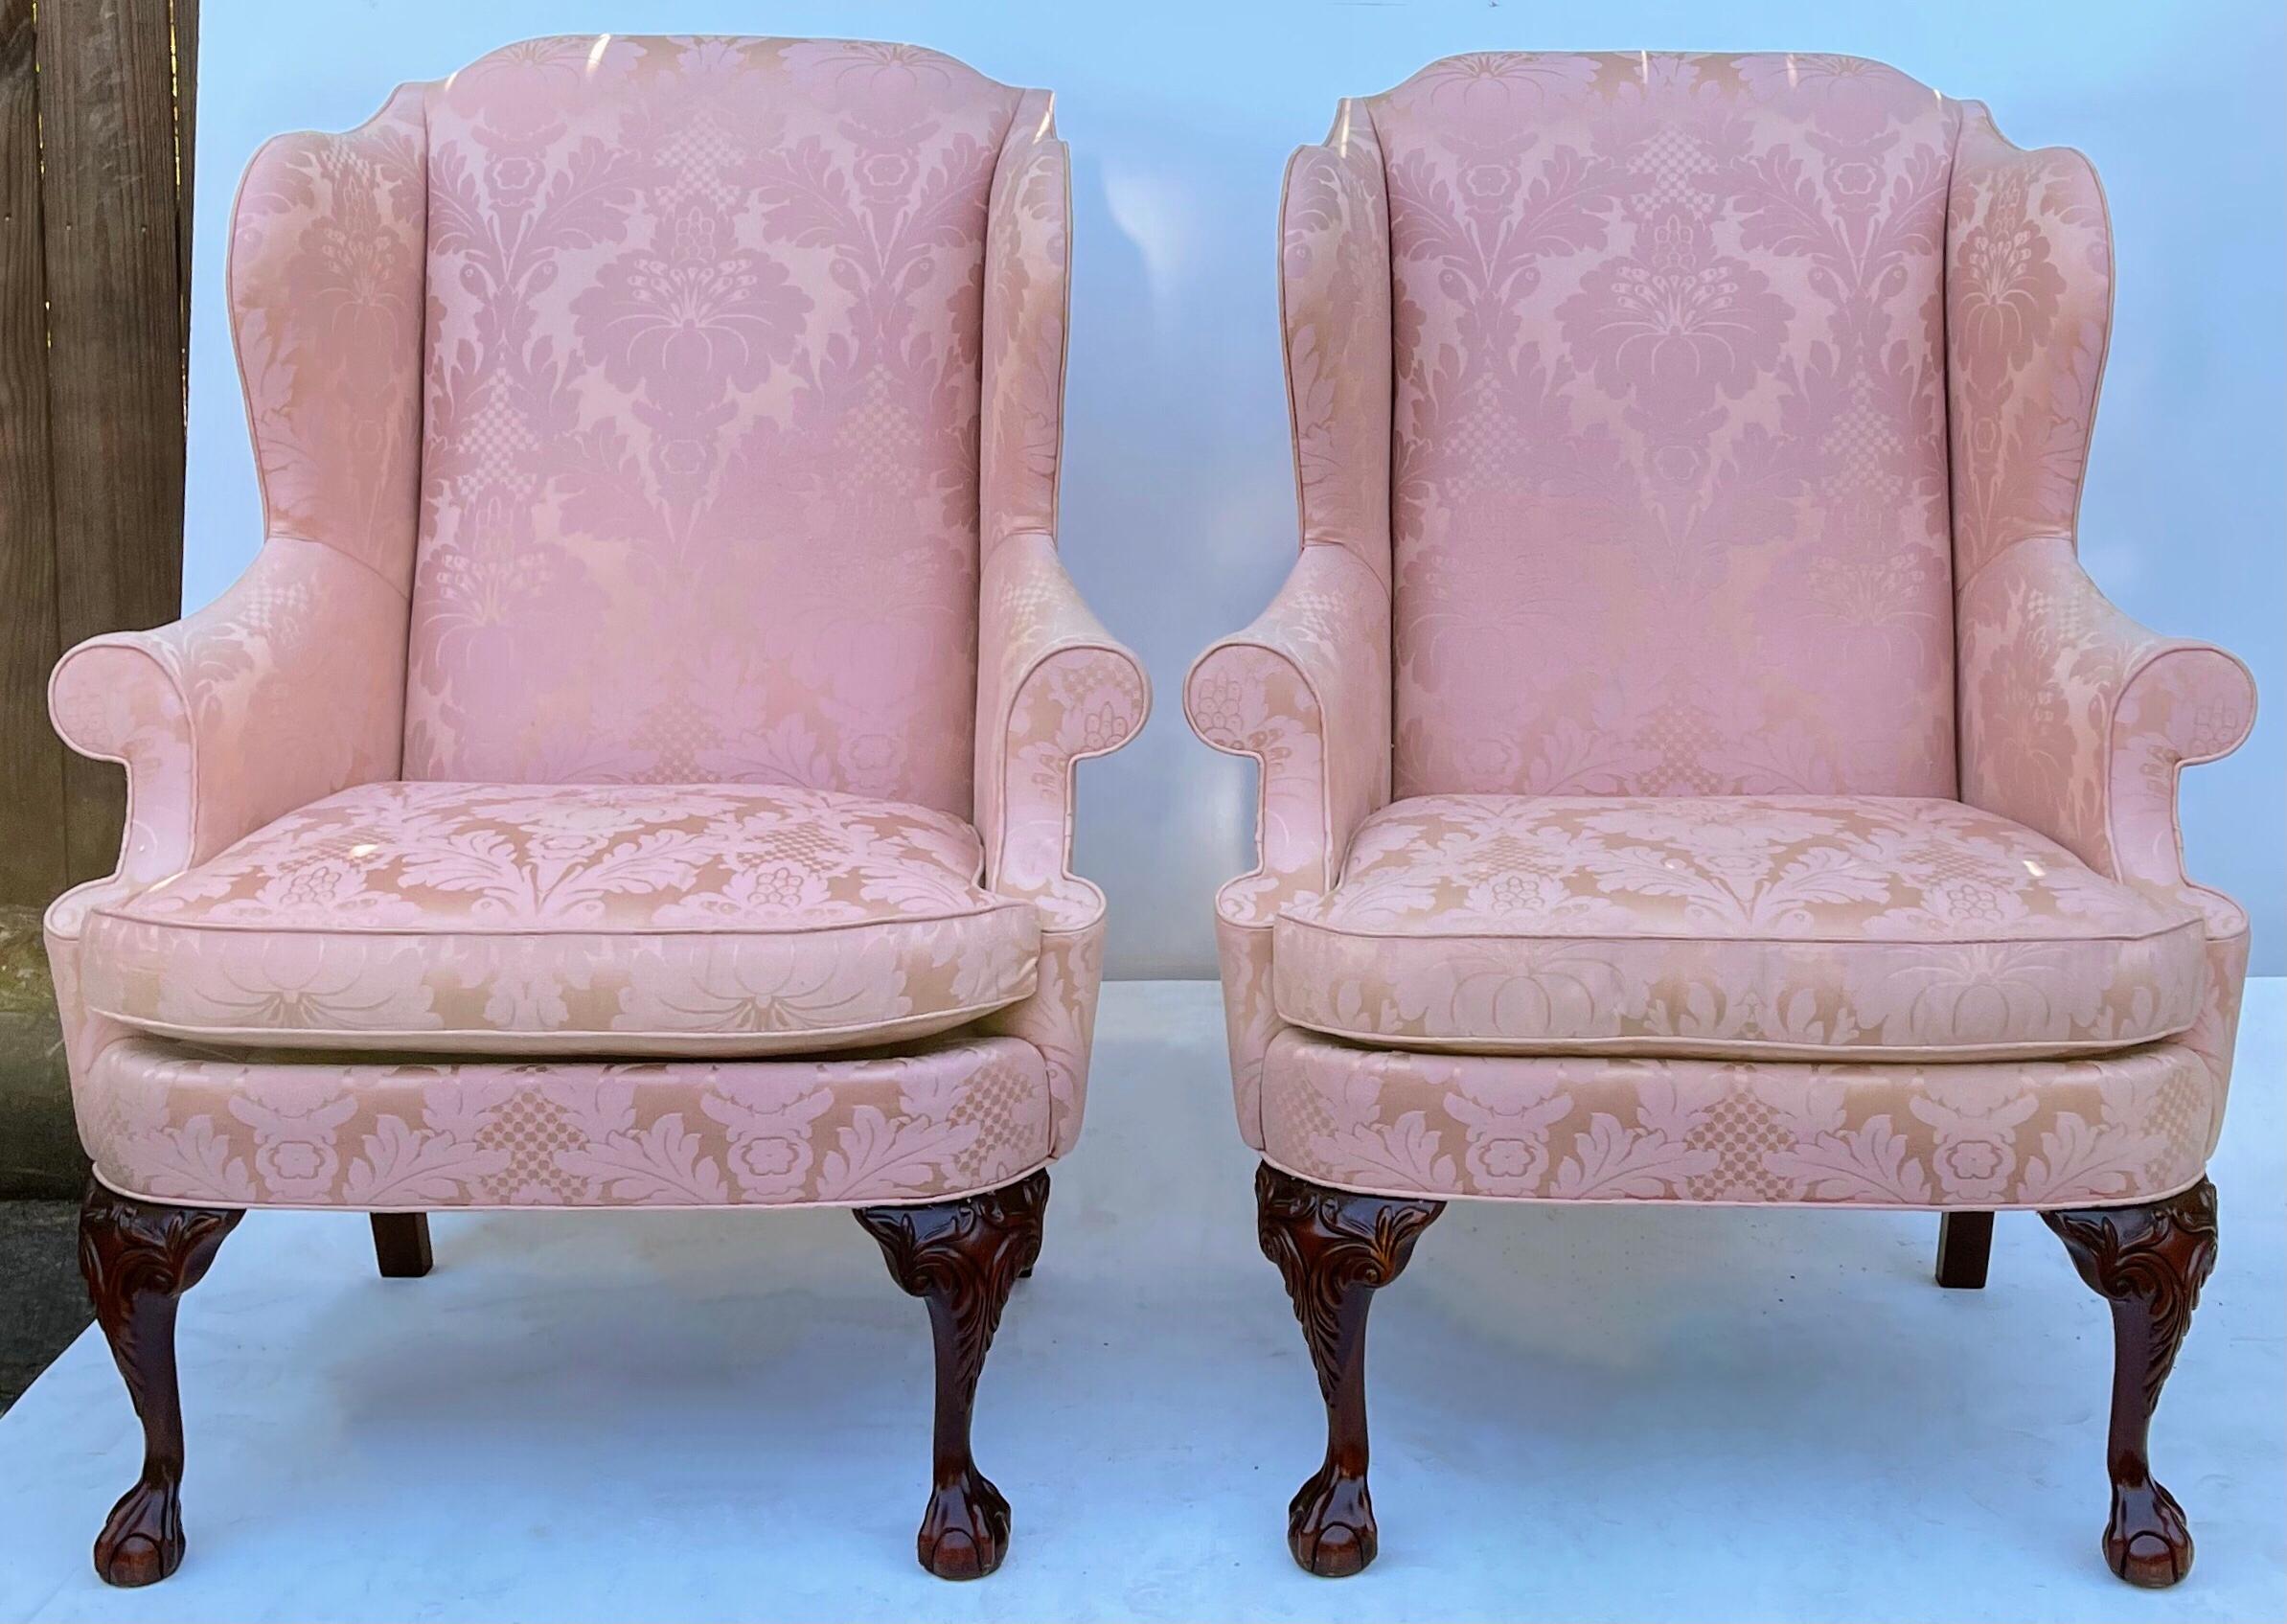 Hickory Chair Wingback - 7 For Sale on 1stDibs | hickory chair 